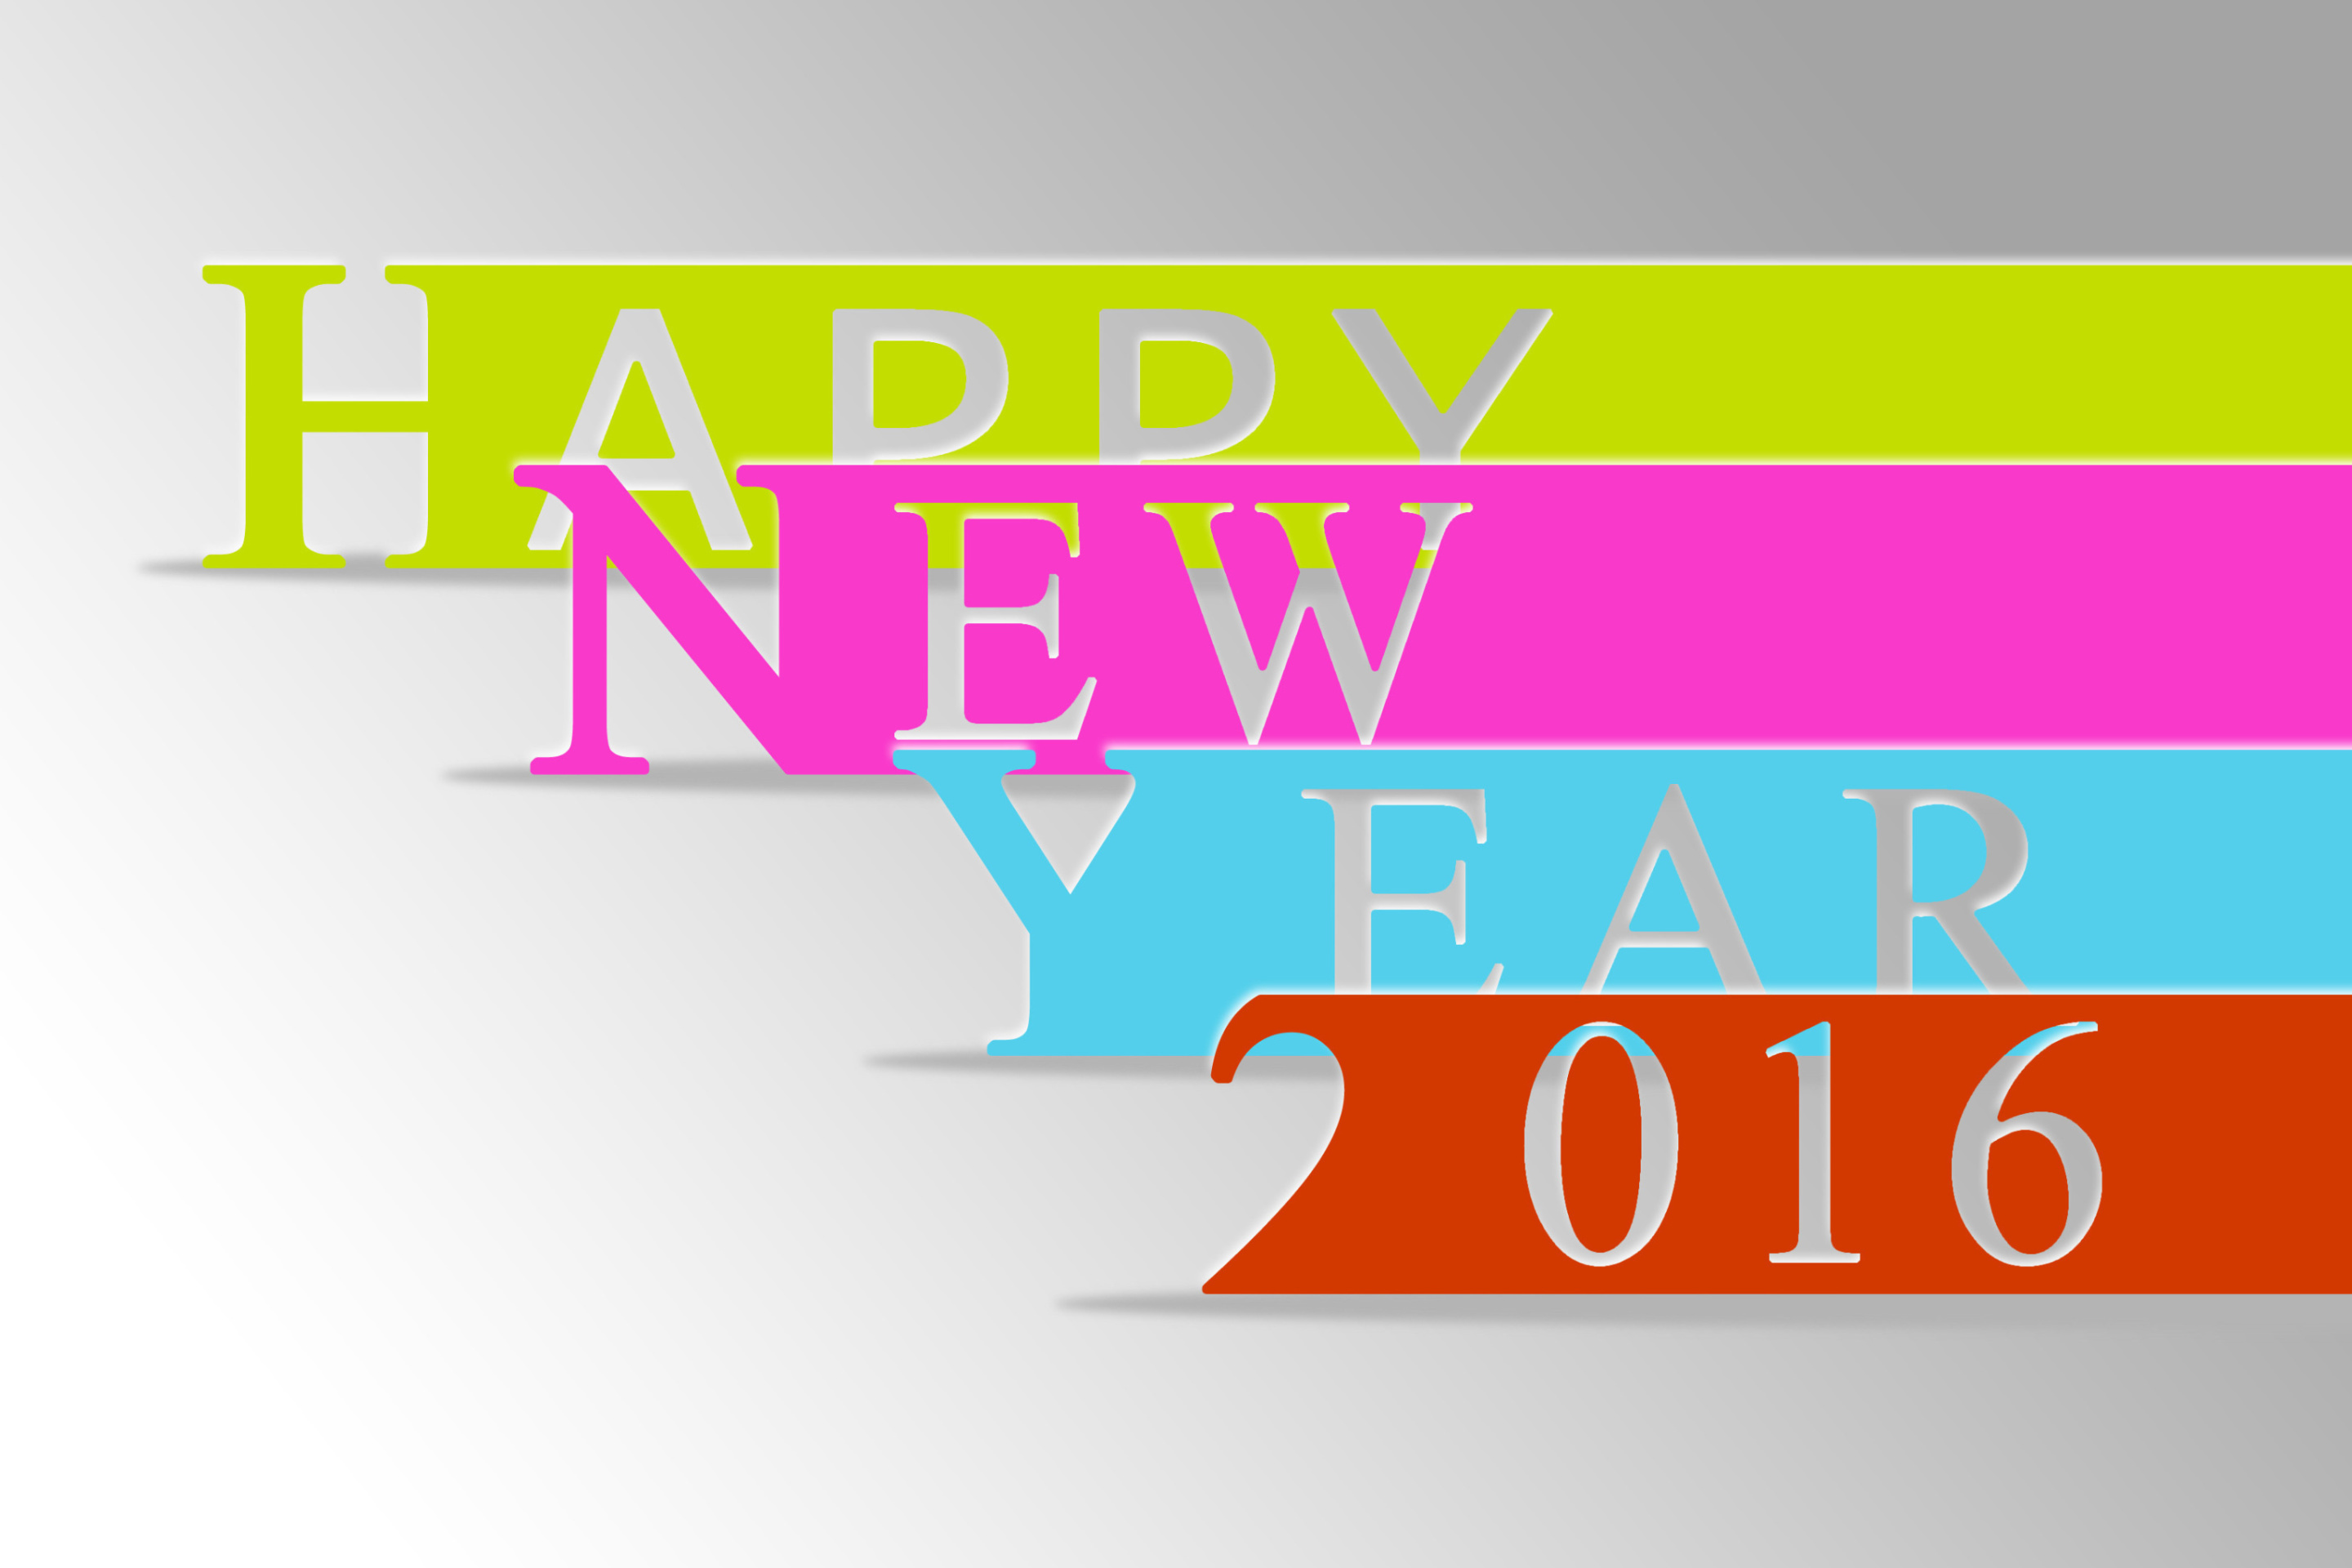 Happy New Year 2016 Colorful wallpaper 2880x1920